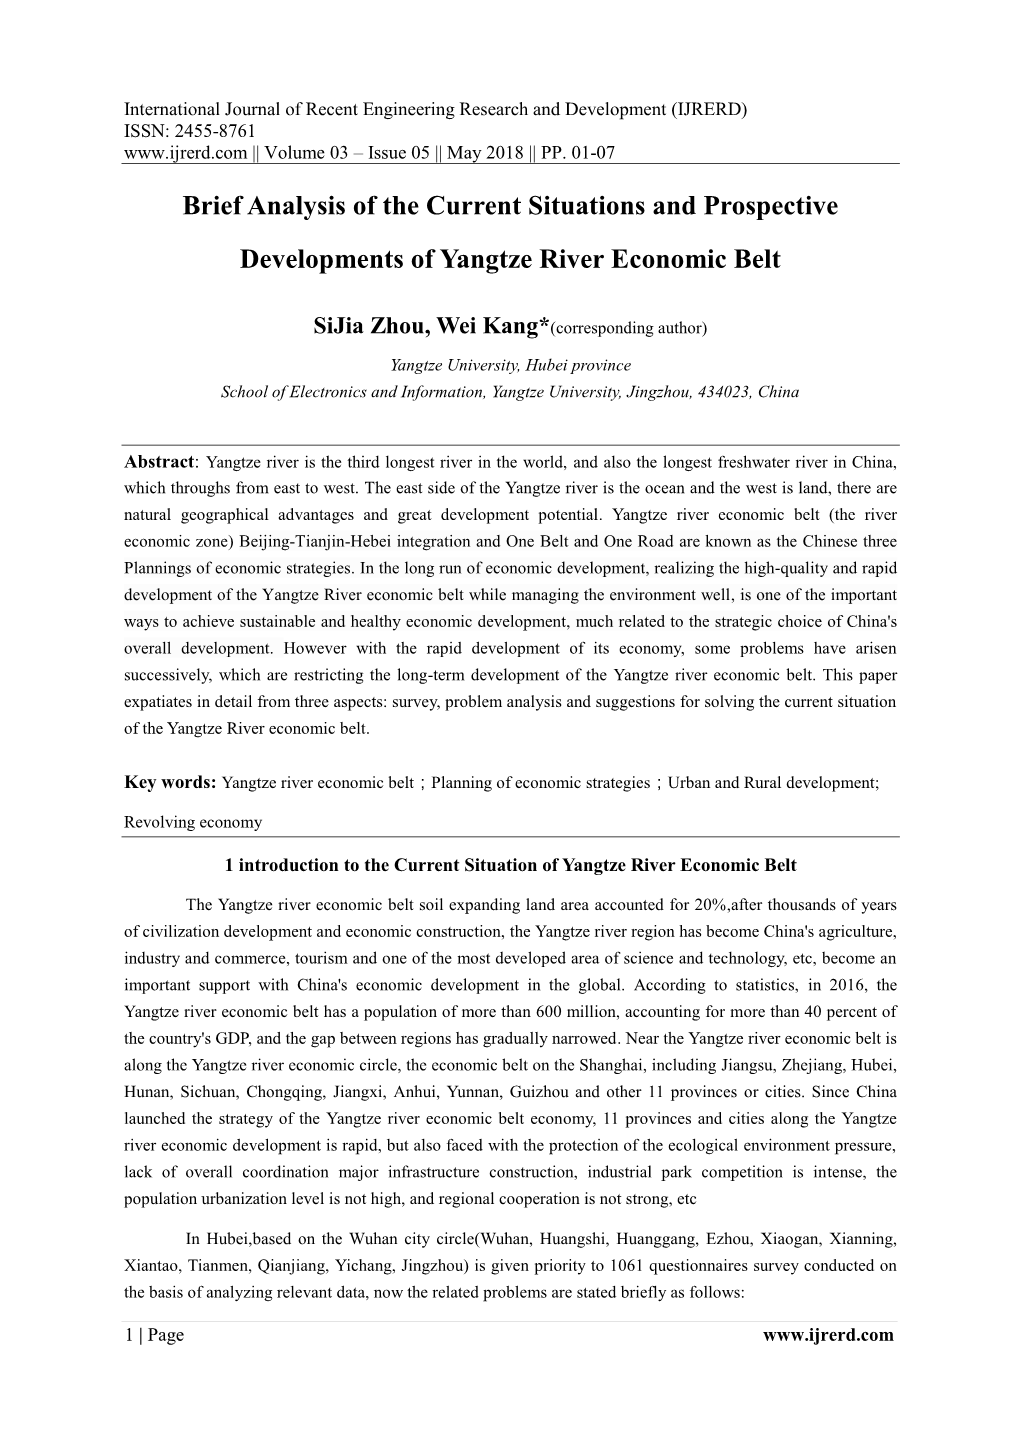 Brief Analysis of the Current Situations and Prospective Developments of Yangtze River Economic Belt